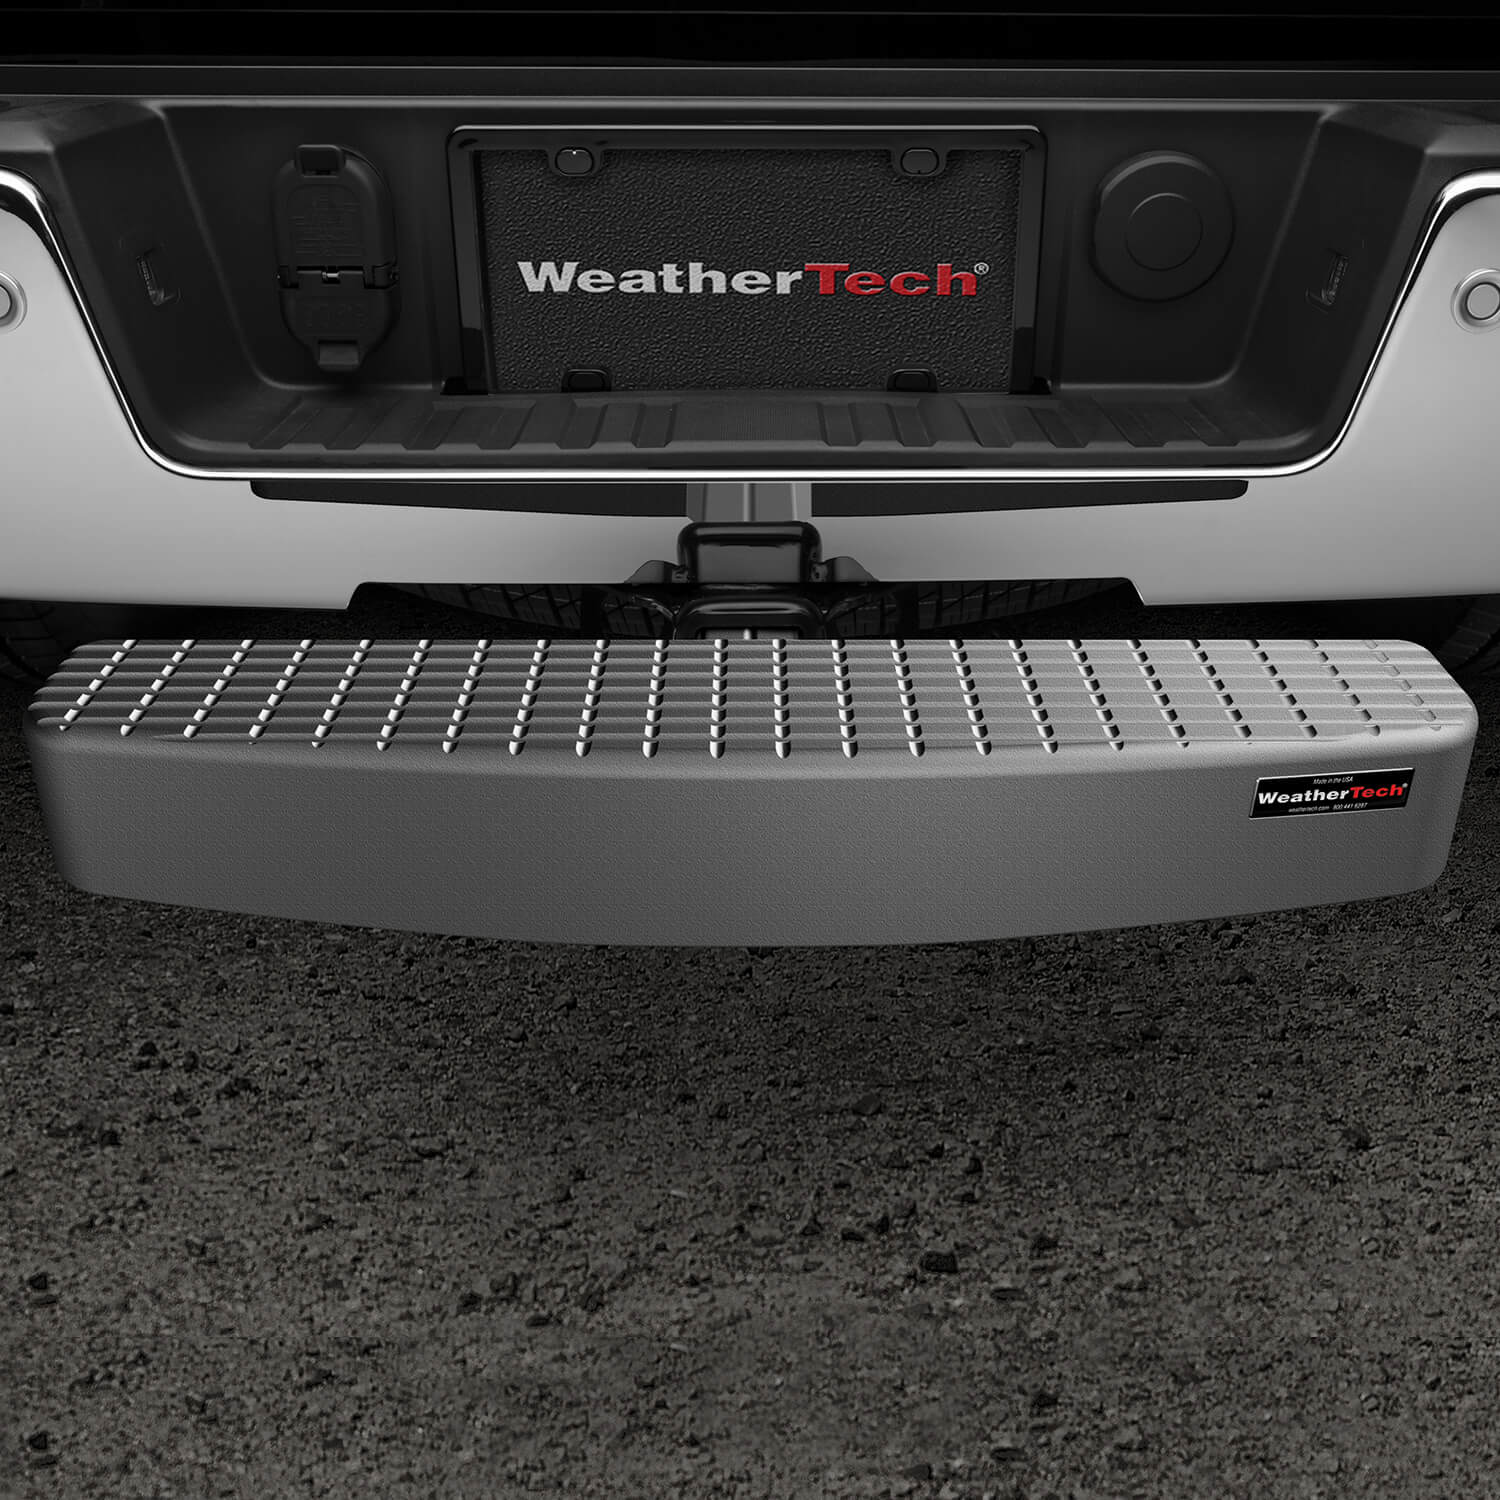 Nothing ruins your day faster than when someone behind you isn't paying attention and crashes into the back of your vehicle. It doesn't matter at what speed, there is usually damage that will cost you the full deductible to repair. Save yourself a trip to the repair shop with the added protection of the WeatherTech&reg; BumpStepXL&reg;. As the name implies this not only provides the maximum rear bump protection you need but also a sturdy, wide step up when you need to access the roof.